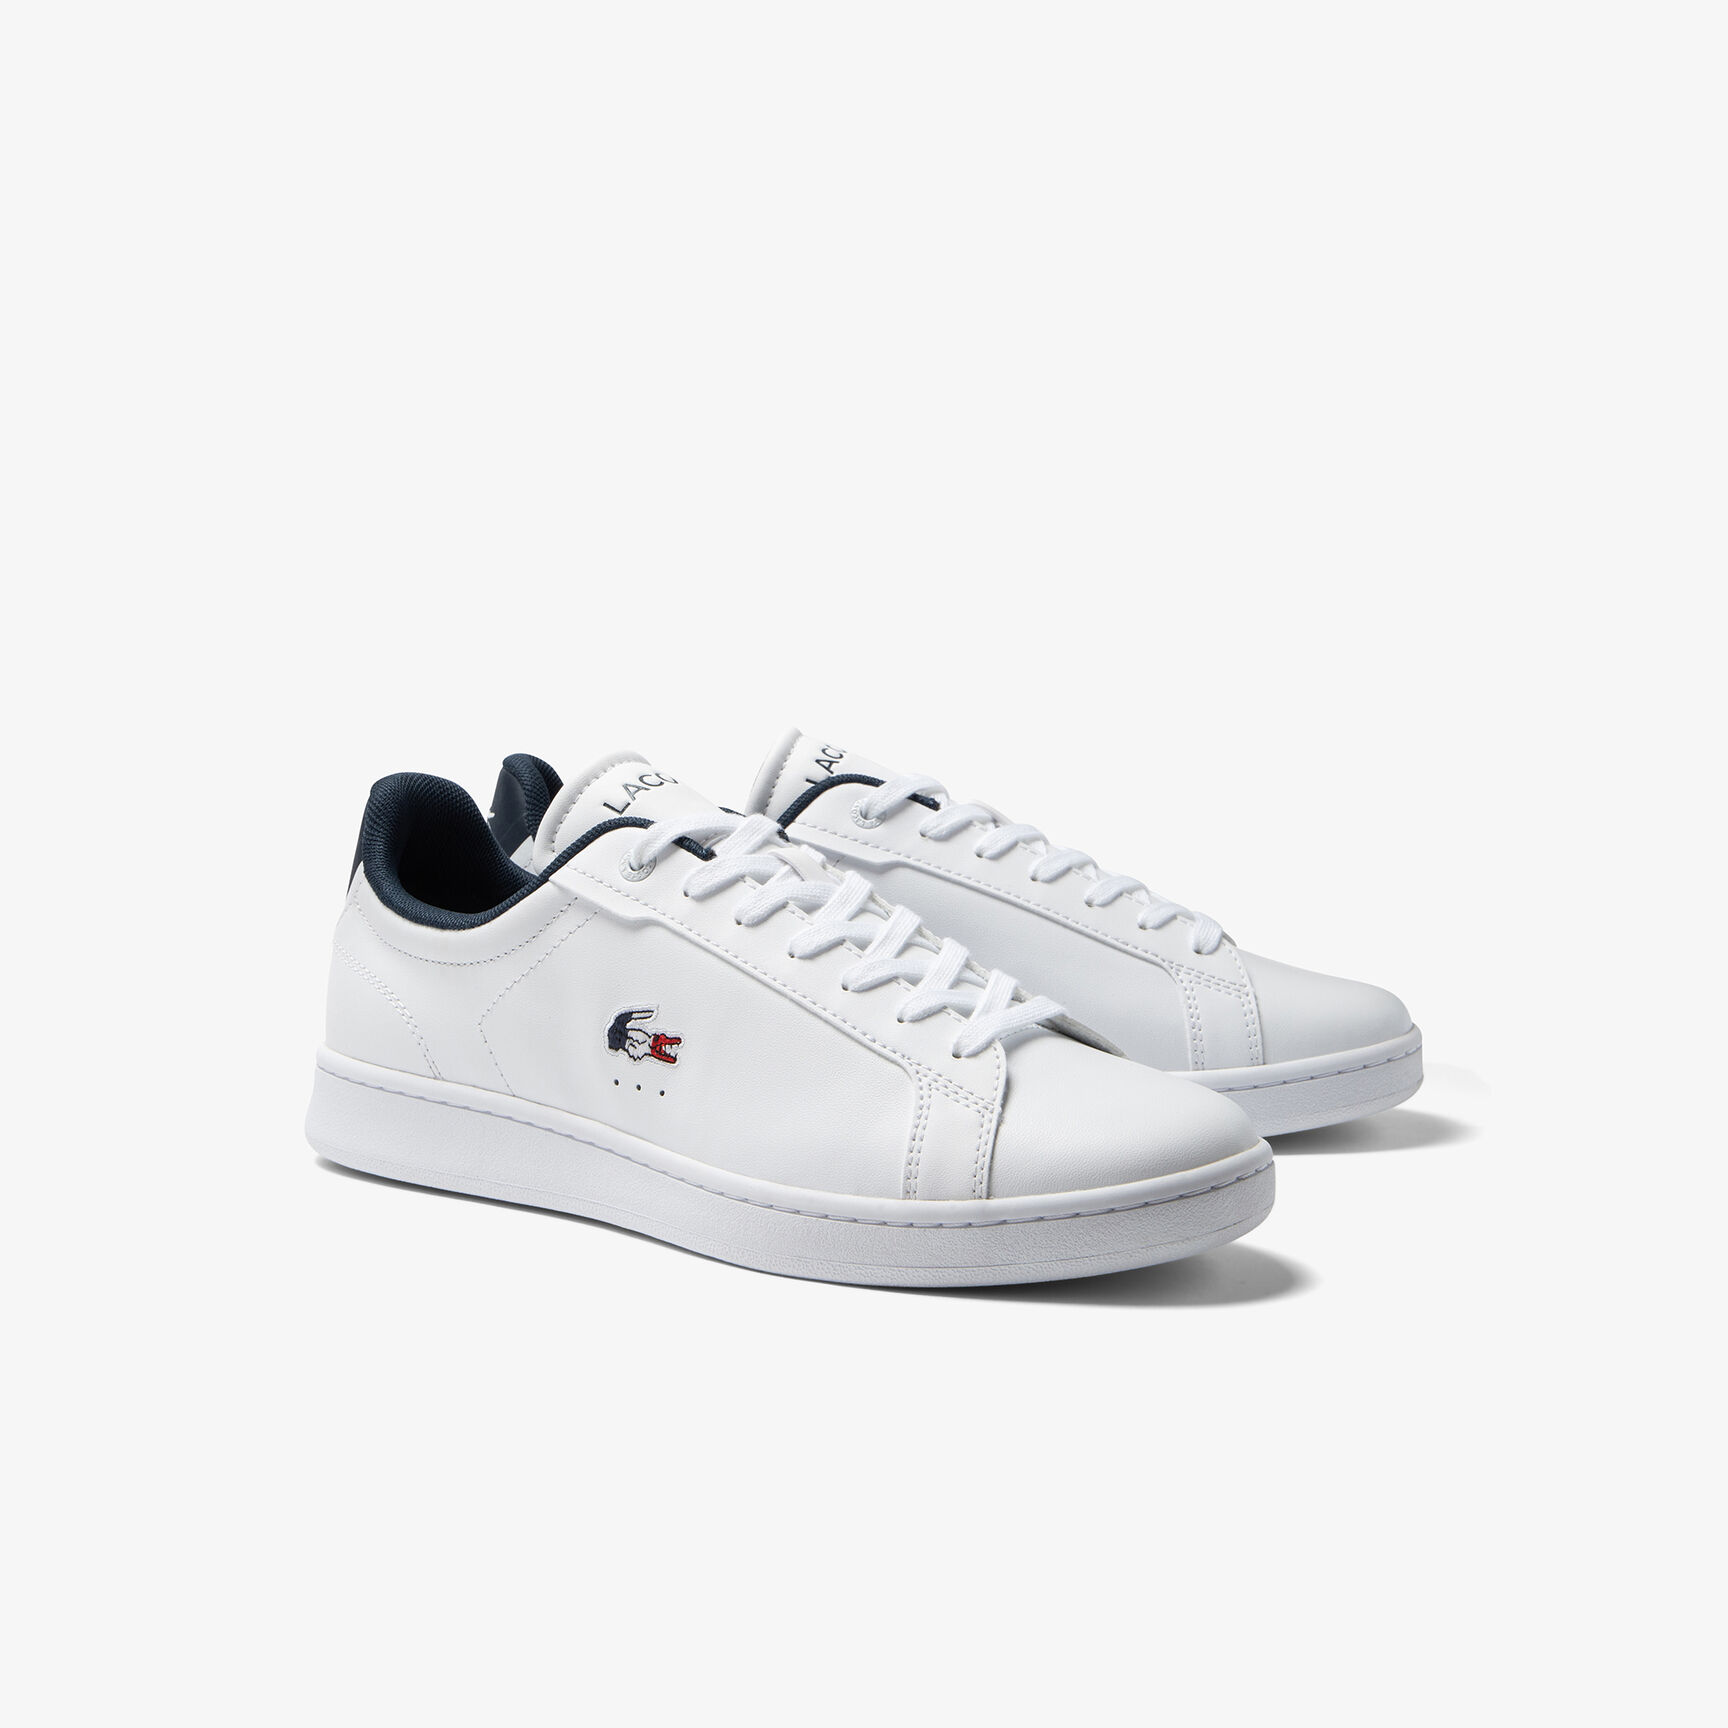 Buy Men's Lacoste Carnaby Pro Leather Tricolour Trainers | Lacoste QA